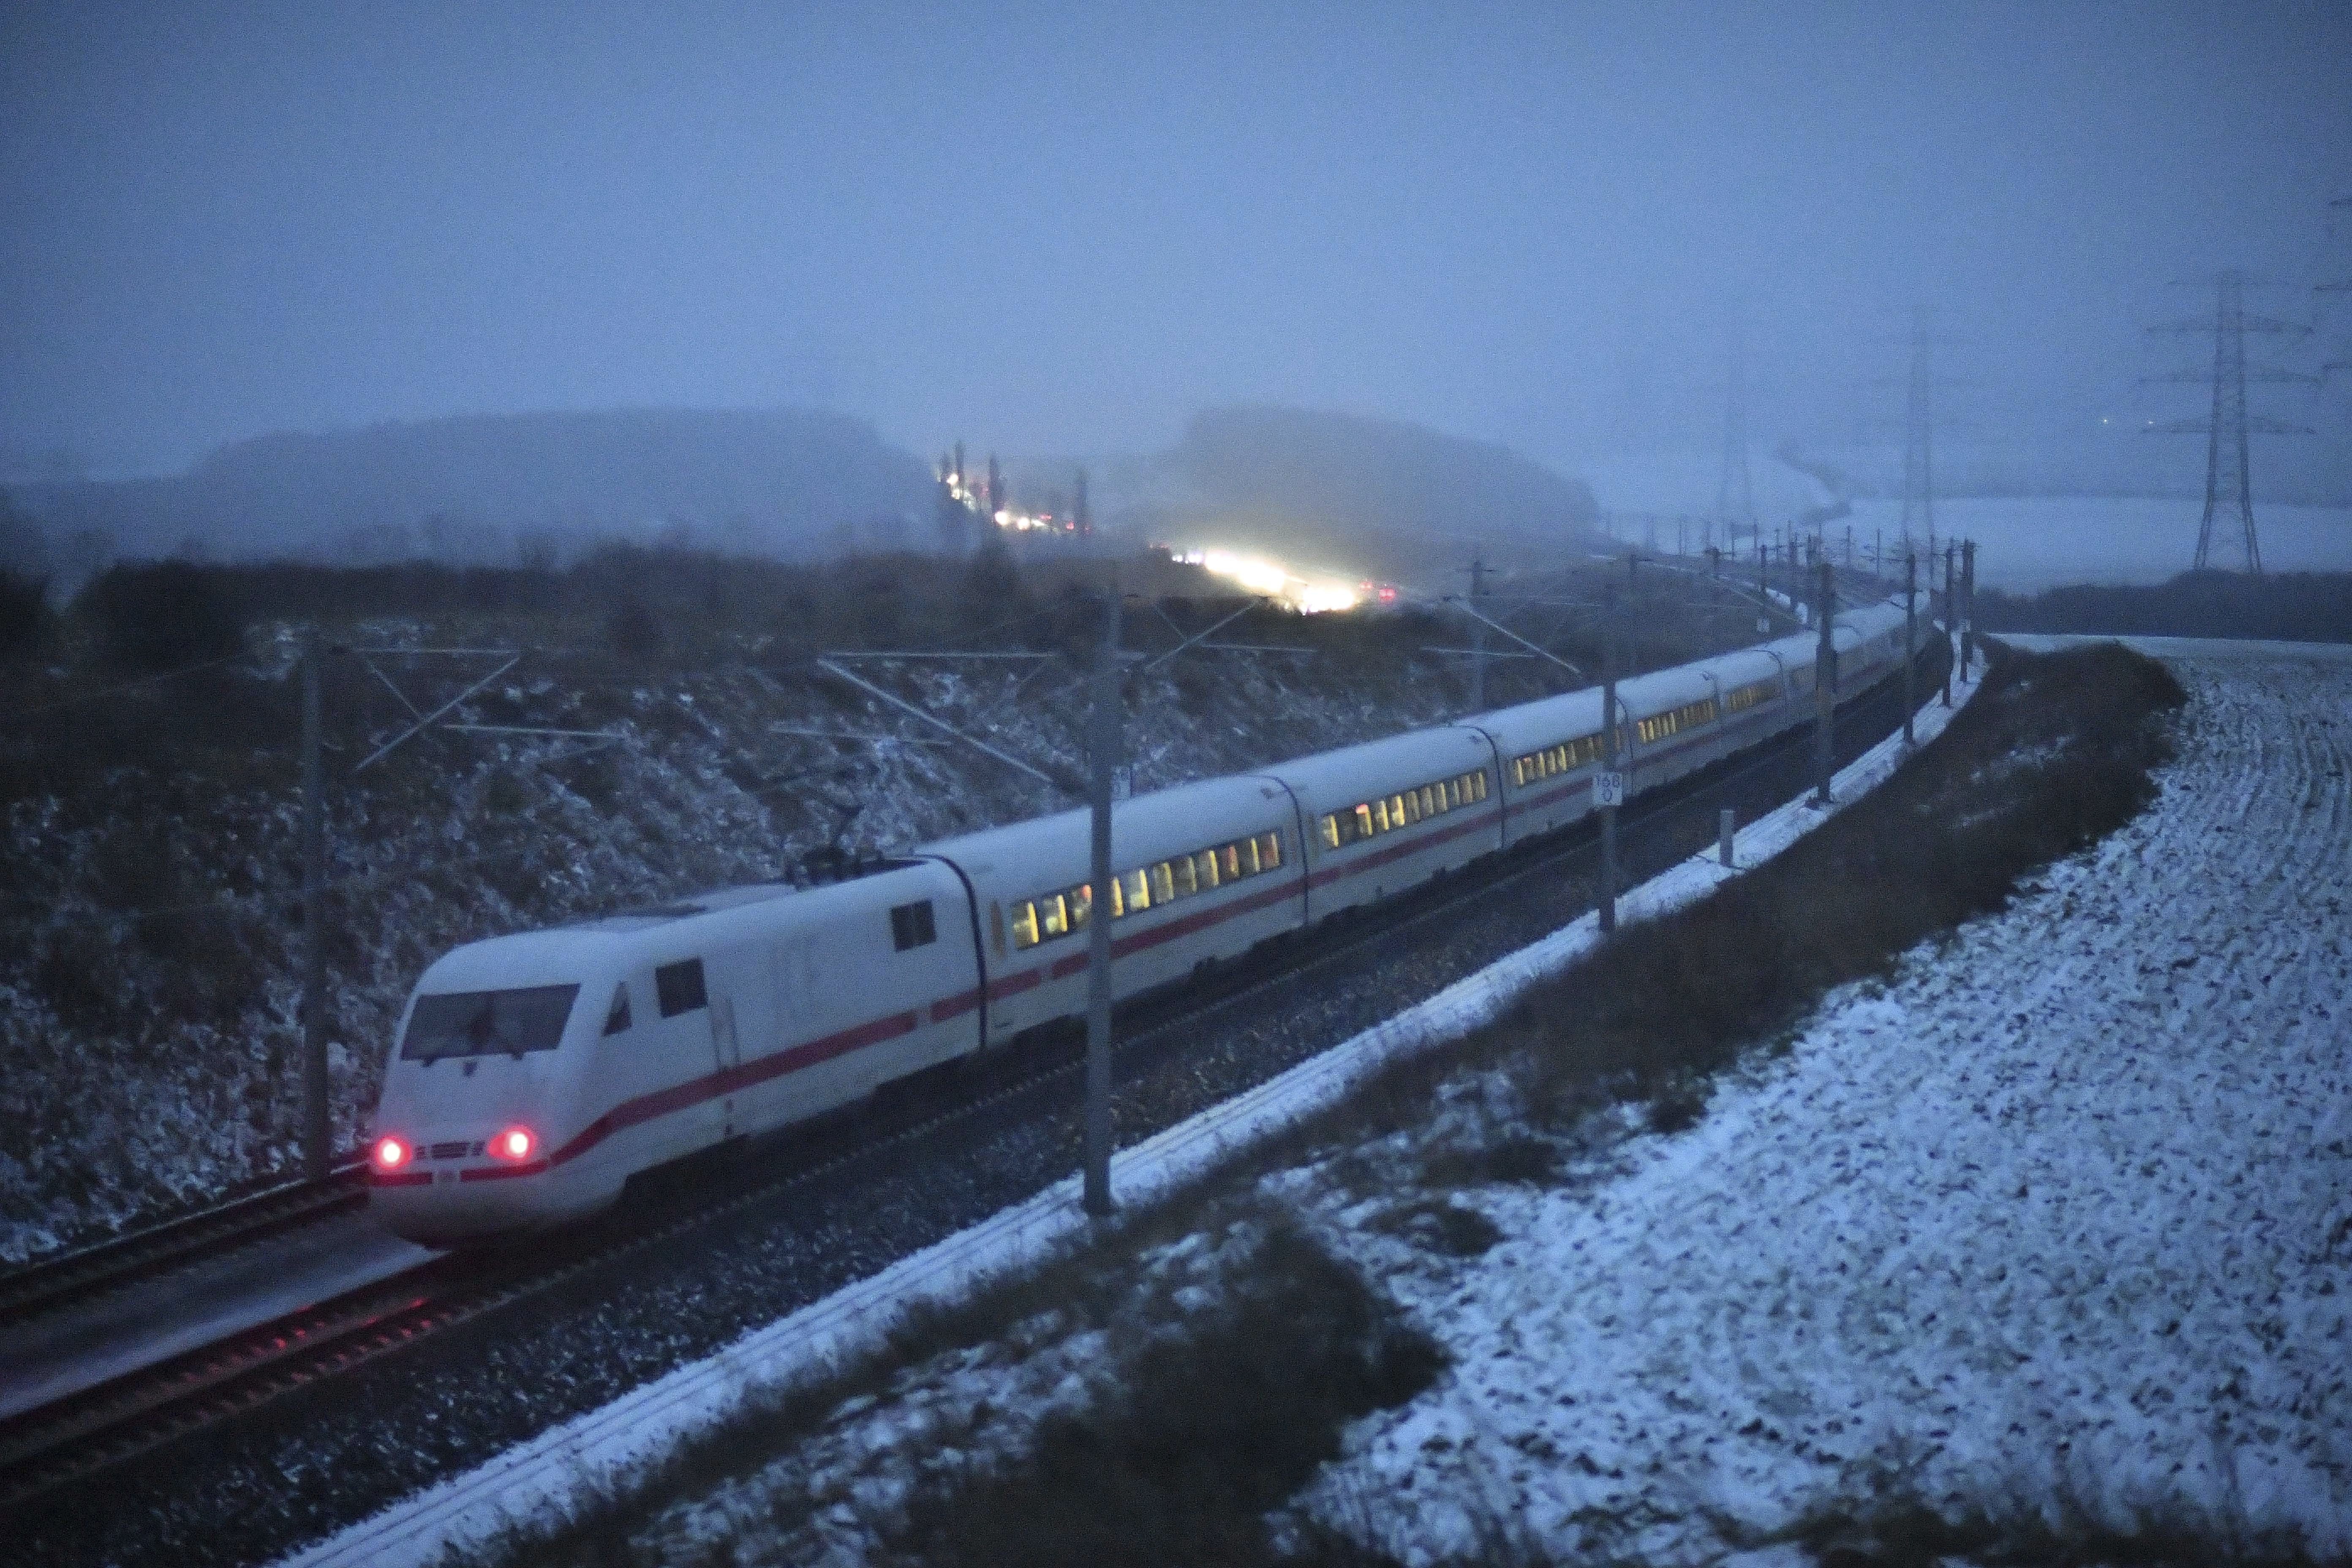 An ICE train of the German railways drives past on the newly built route between Erfurt and Nuremberg, near Arnstadt, Germany, 18 January 2018. The German railways have issued a warning regarding the storm 